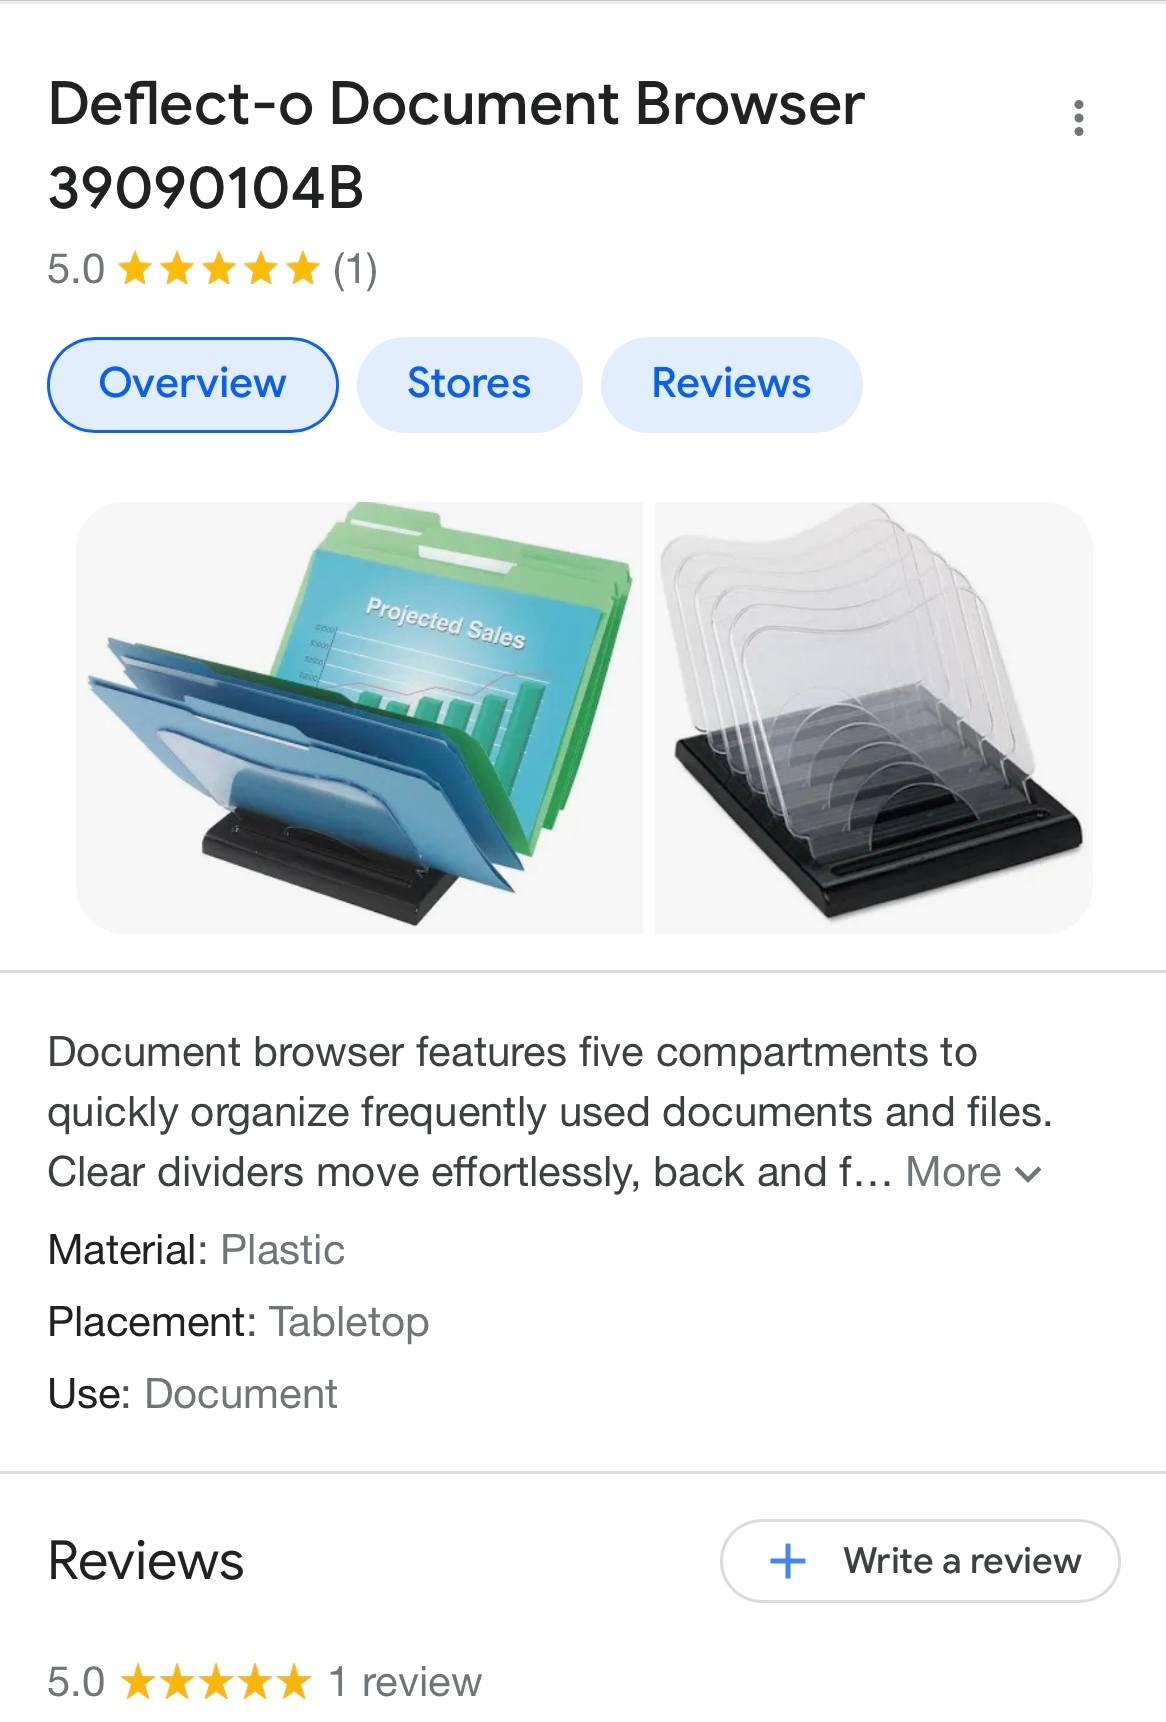 DOC BROWSER 3